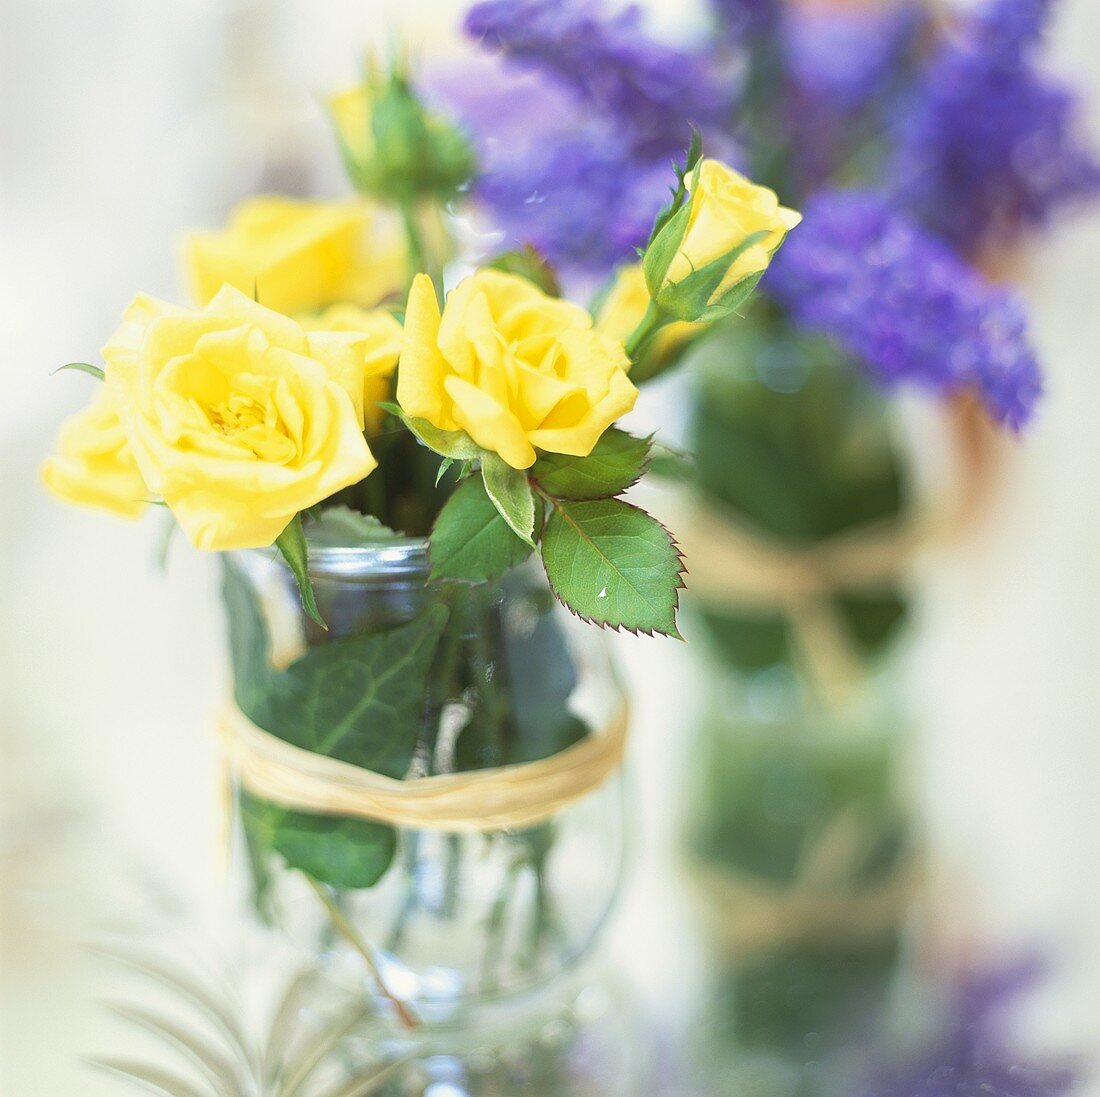 Posies of yellow roses and grape hyacinths